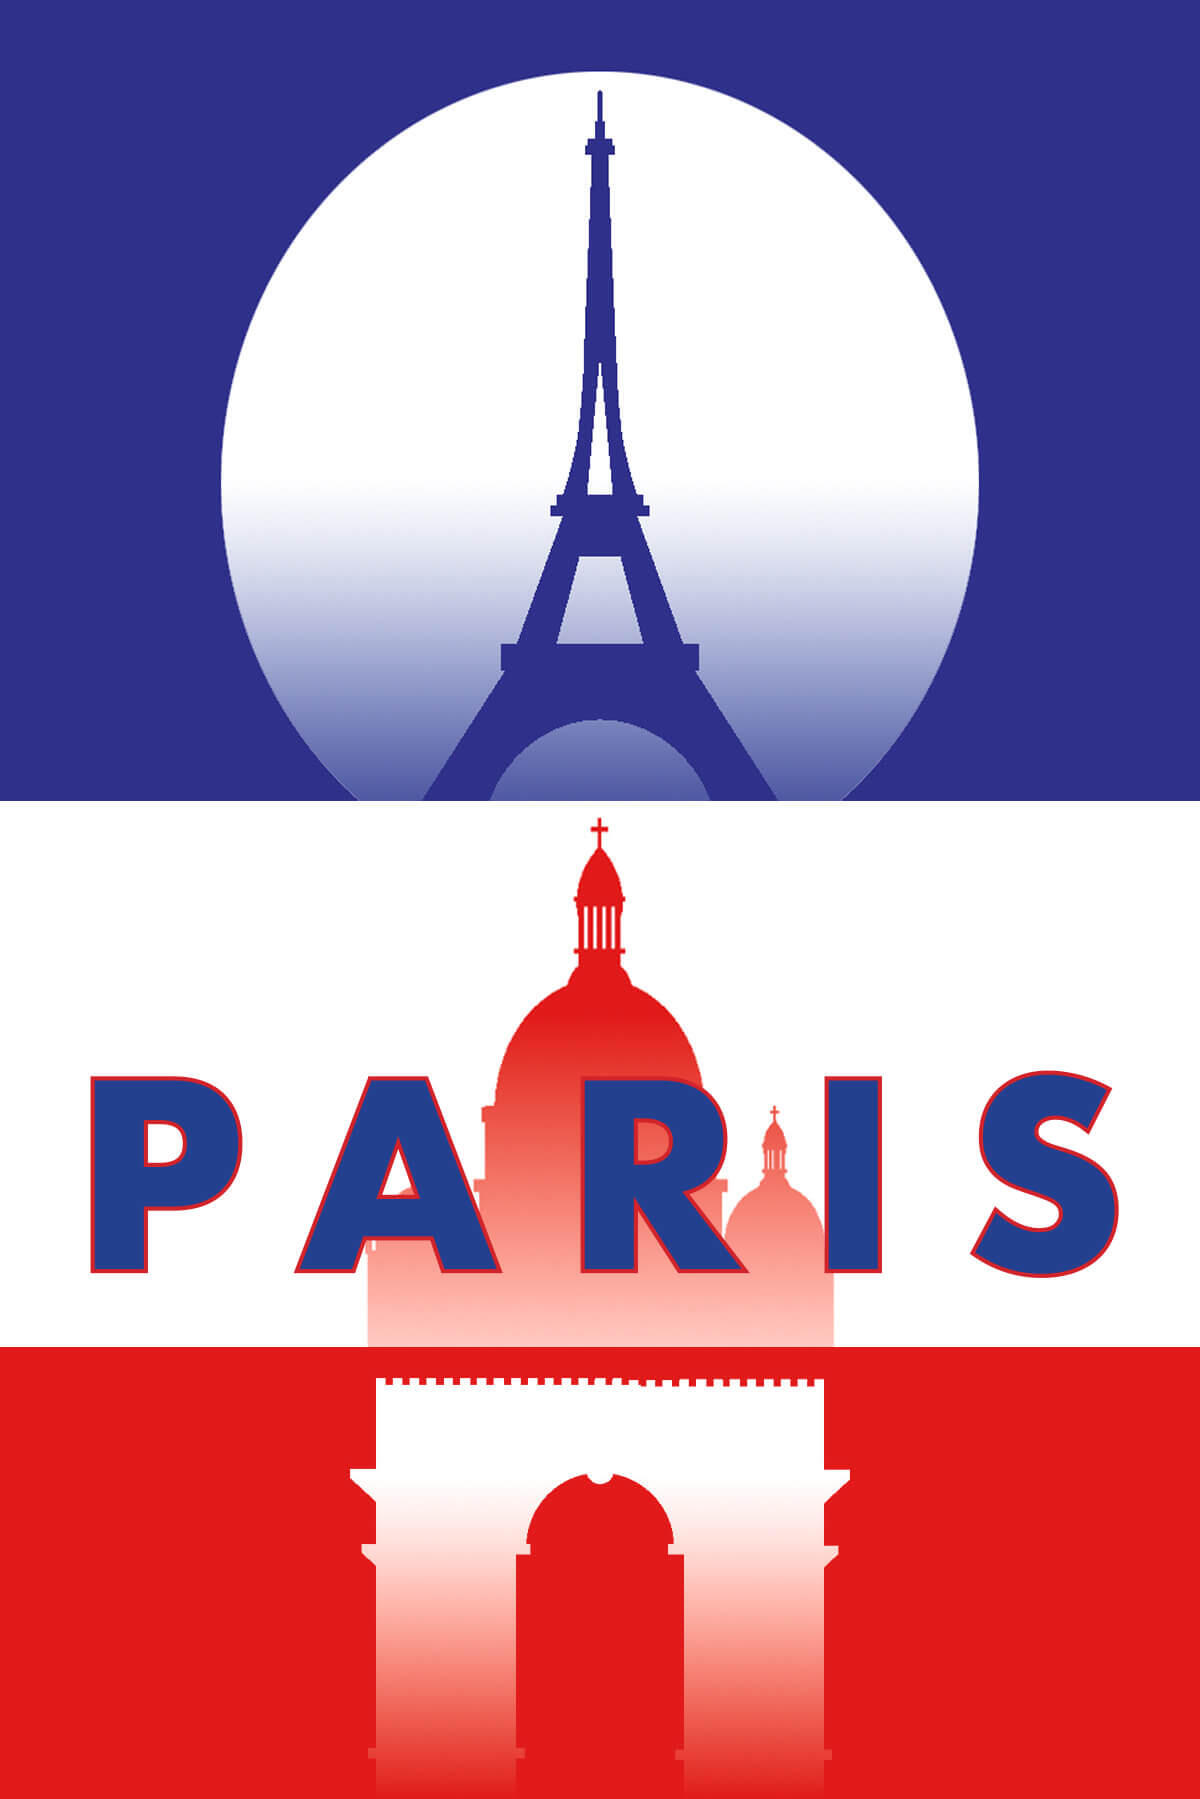 Paris travel poster showing the Eiffel Tower and other landmarks.